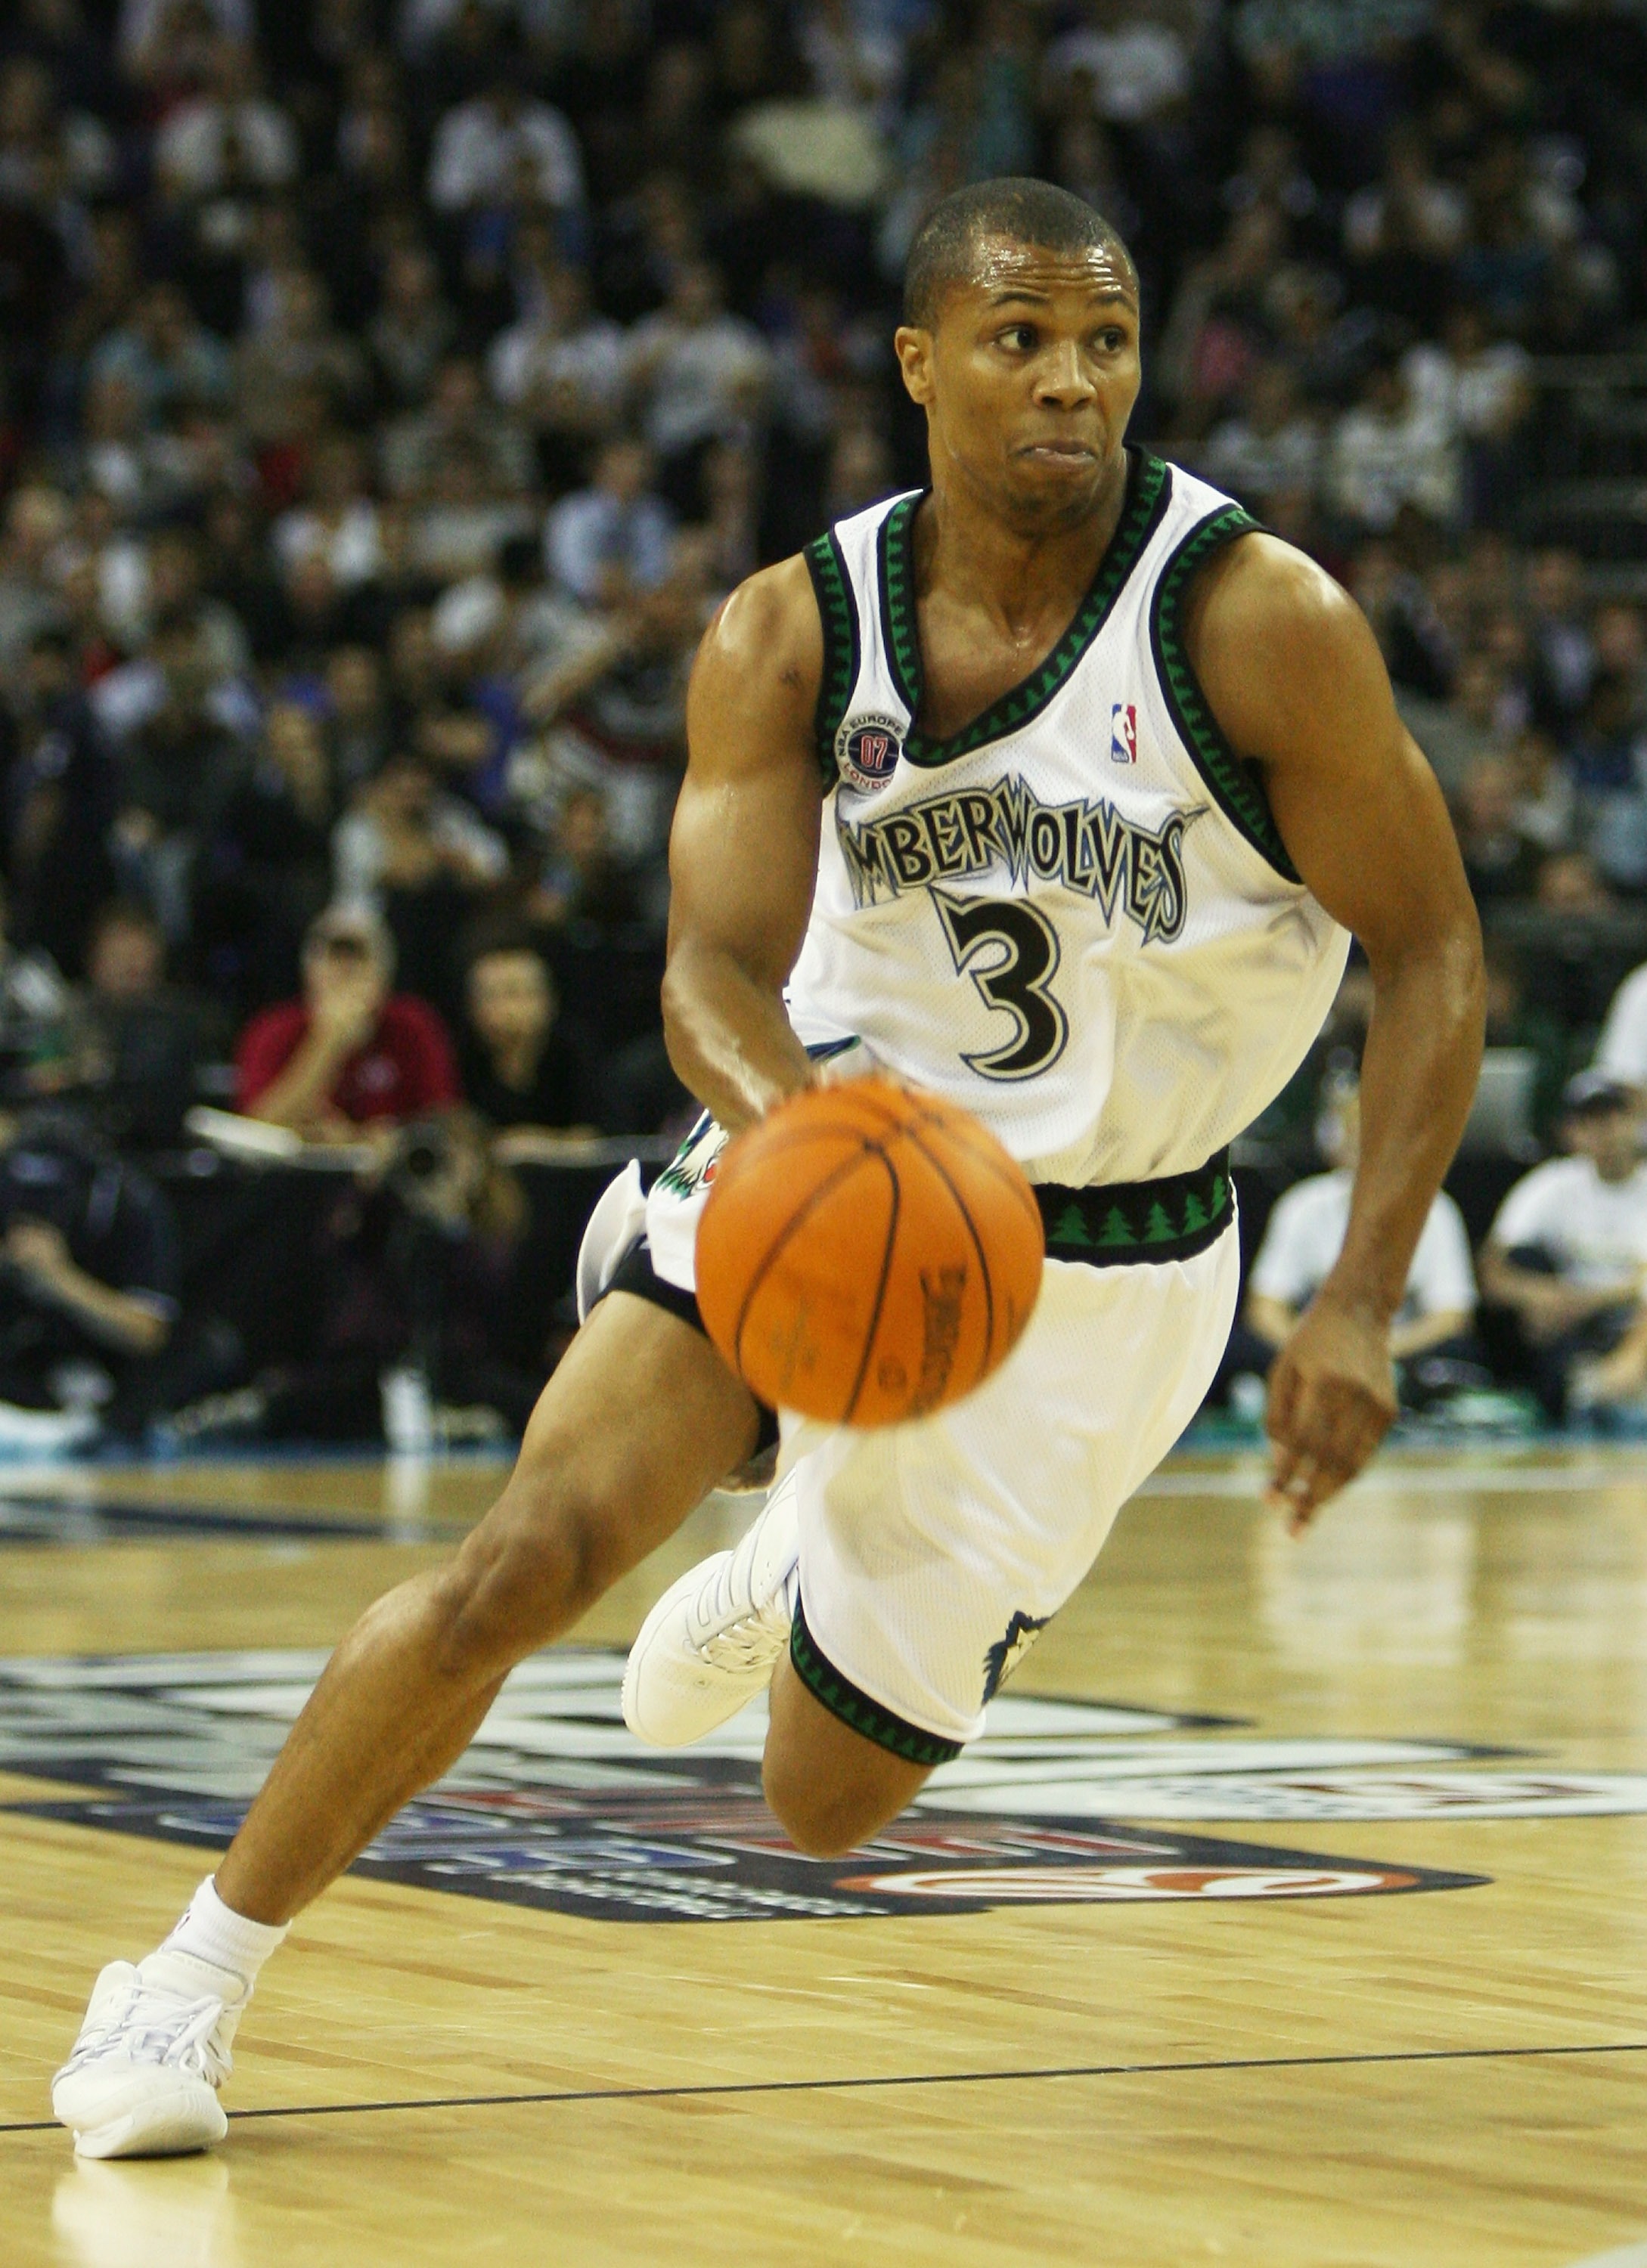 LONDON - OCTOBER 10:  Sebastian Telfair of Minnesota runs with the ball during NBA Europe Live 2007 Tour match between the Boston Celtics and the Minnesota Timberwolves at the O2 Arena on October 10, 2007 in London, England.  NOTE TO USER: User expressly